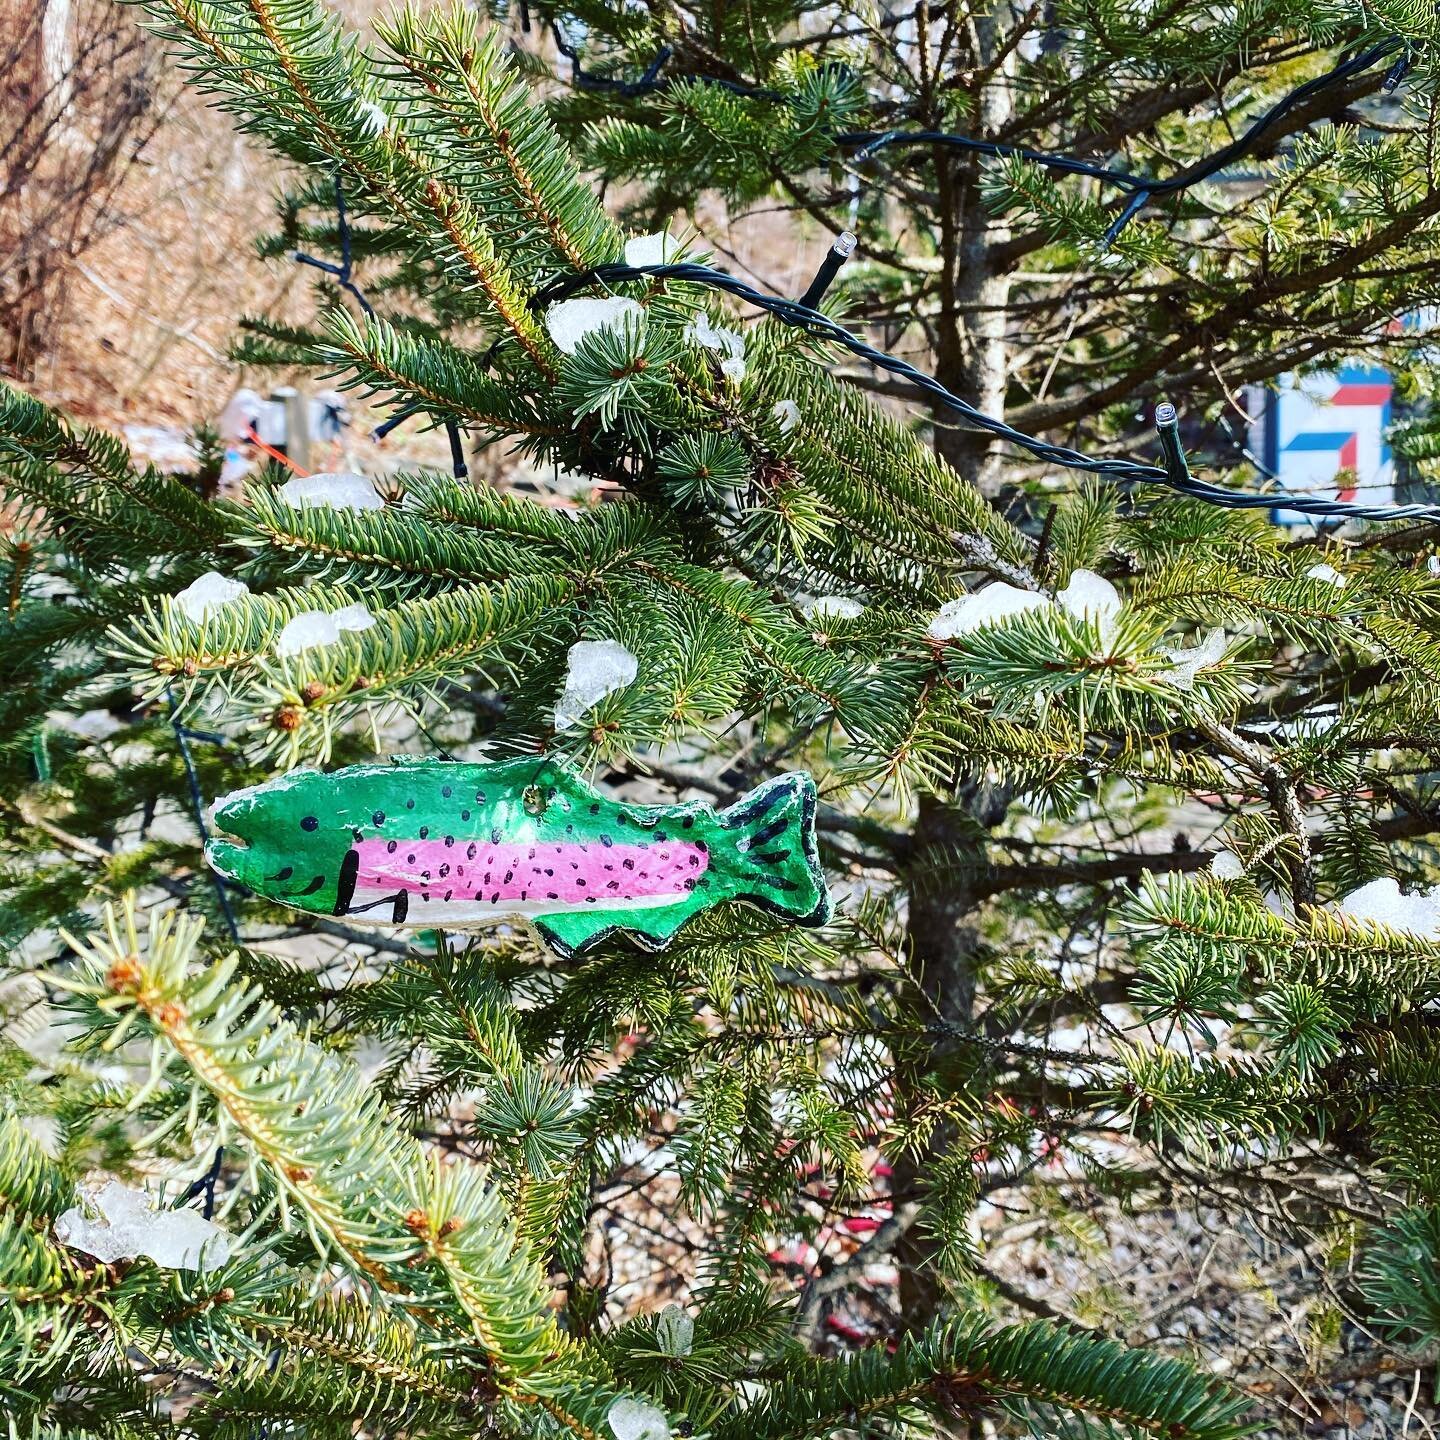 Check out RNSP&rsquo;s eco-friendly decorated tree at the Neversink Bicentennial Square holiday display! Hand painted ornaments, made by RNSP&rsquo;s hard-working intern, Bella. 
Be sure to look at all the other decorated trees, hand painted signs, a